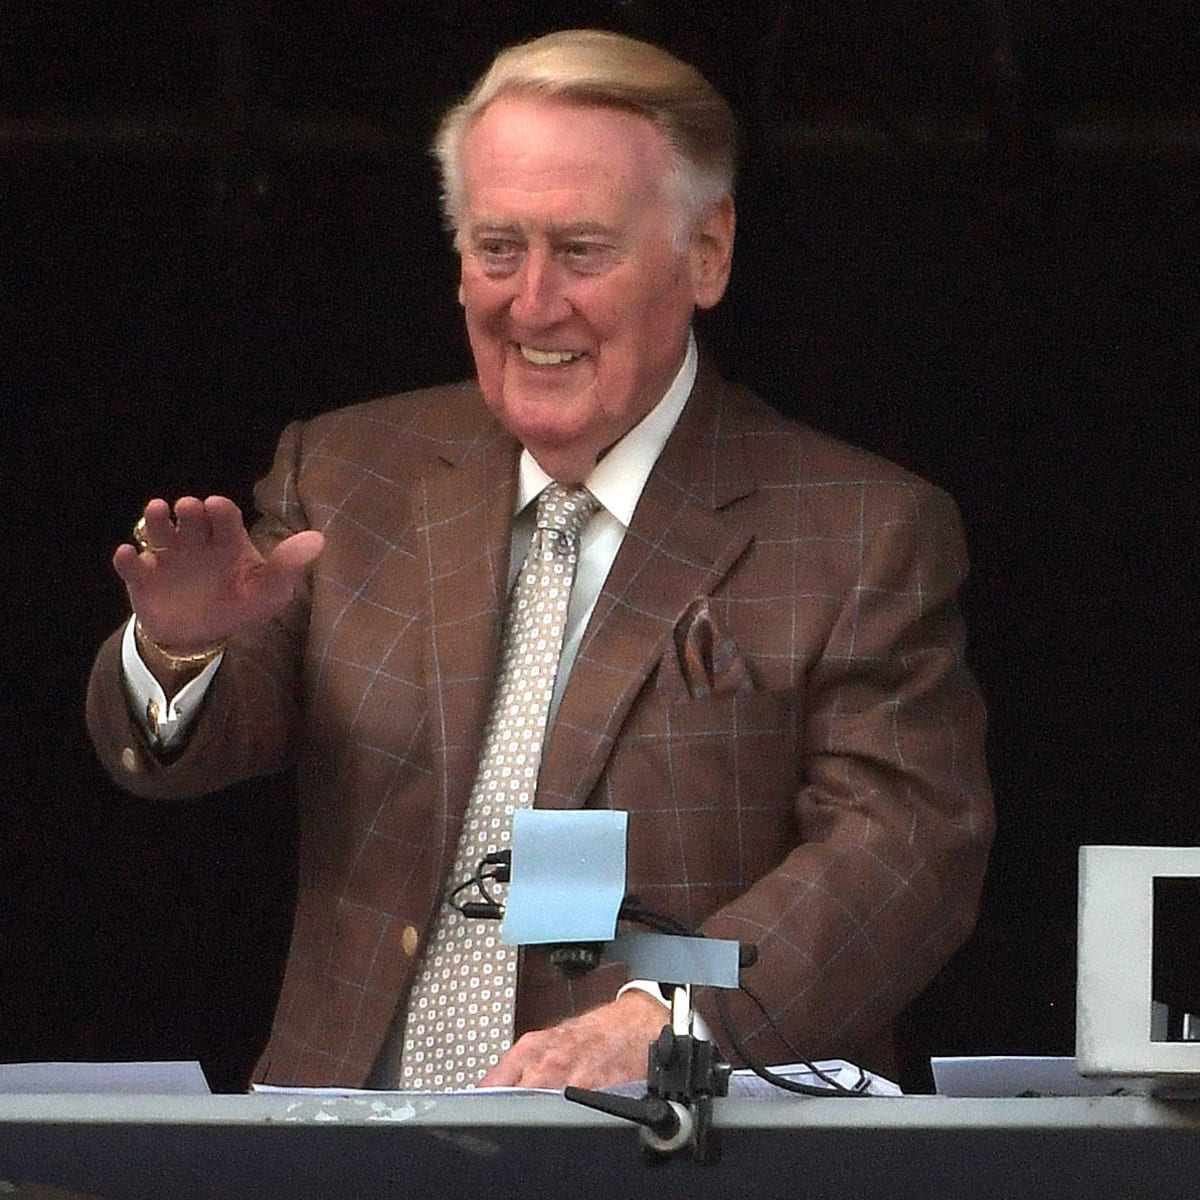 Highlight] Vin Scully's Masterful Call of the 10th Inning of Game